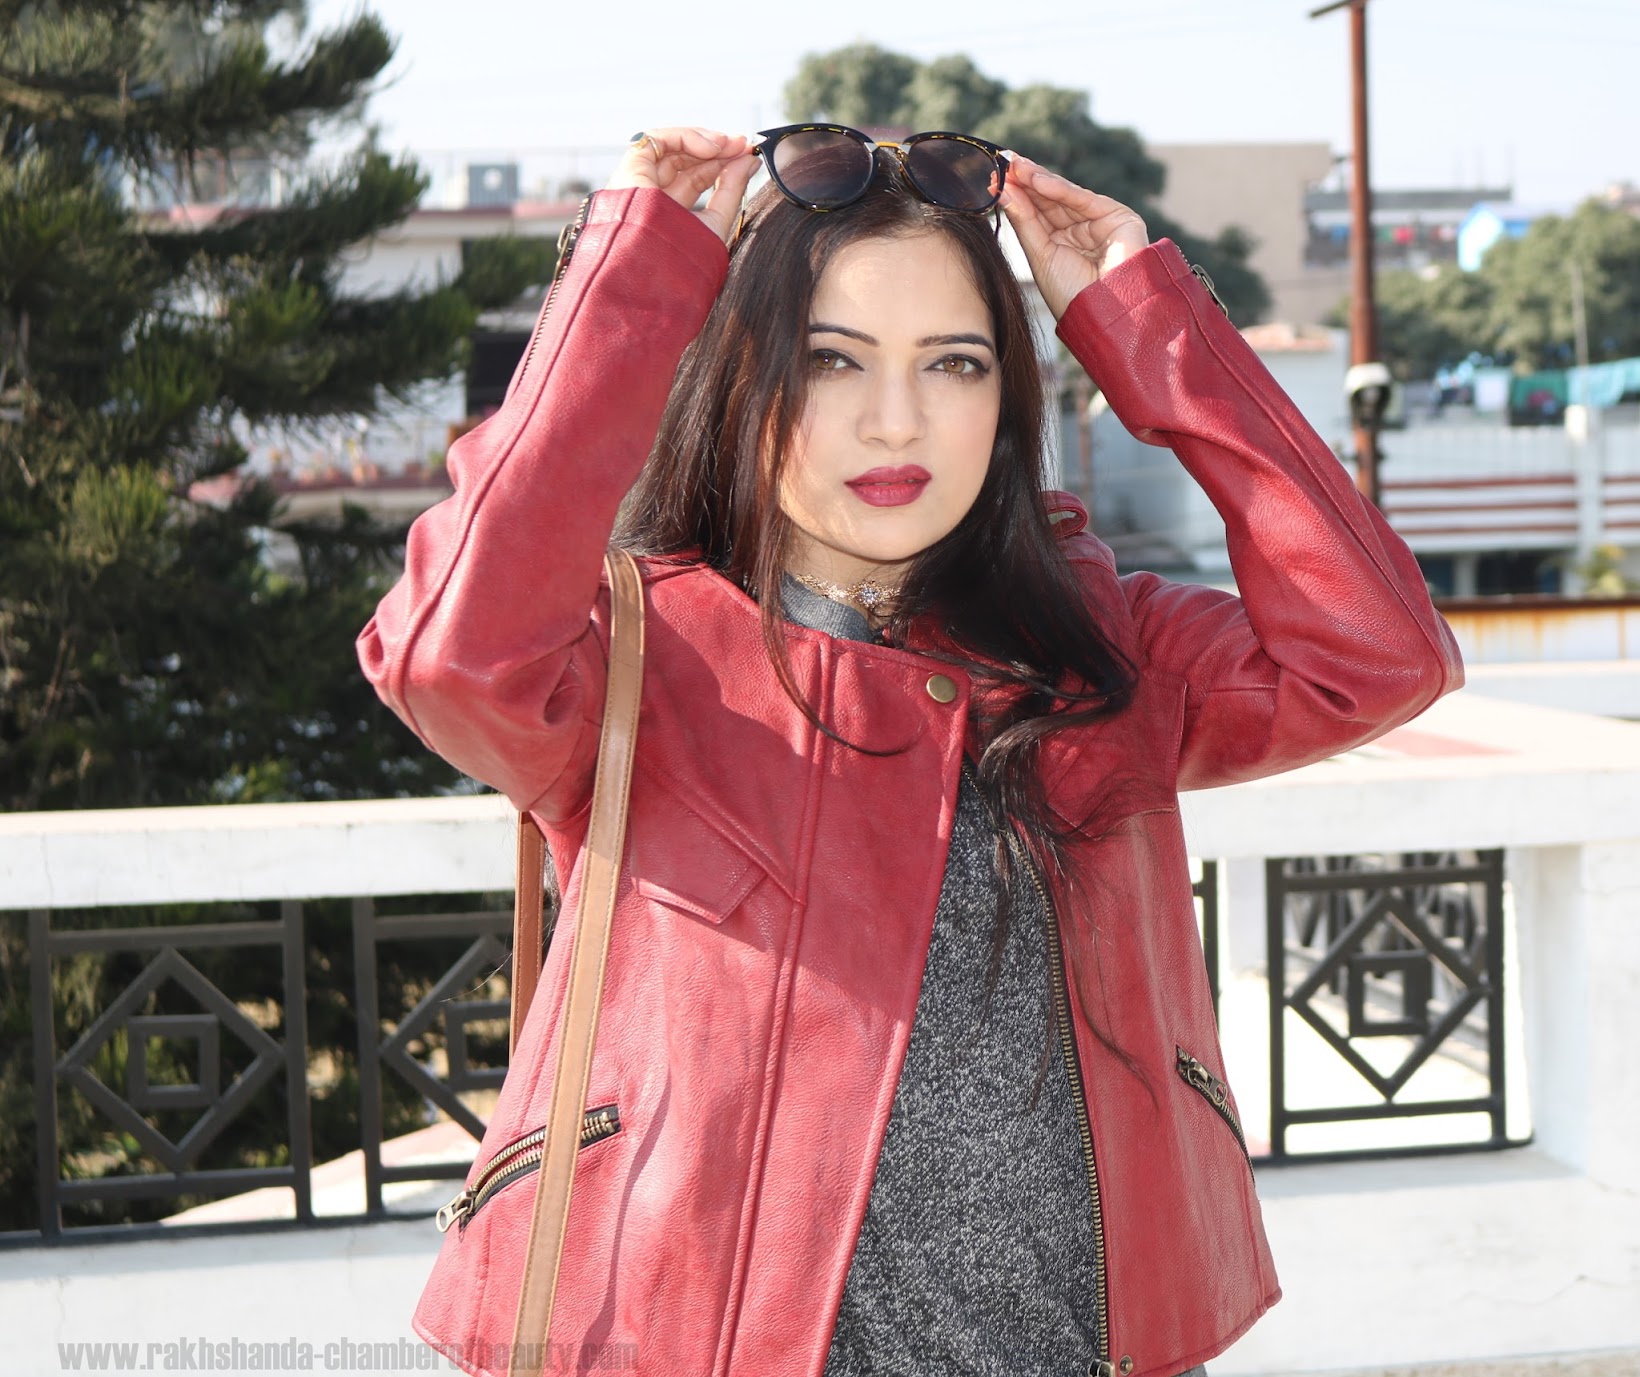 fashion, Front Row Shop, Indian fashion blogger, leather jacket, OOTD, styling a leather jacket, Vero Moda, winter fashion, Chamber Of Beauty, top fashion blog in India, how to style a burgundy leather jacket, ripped jeans